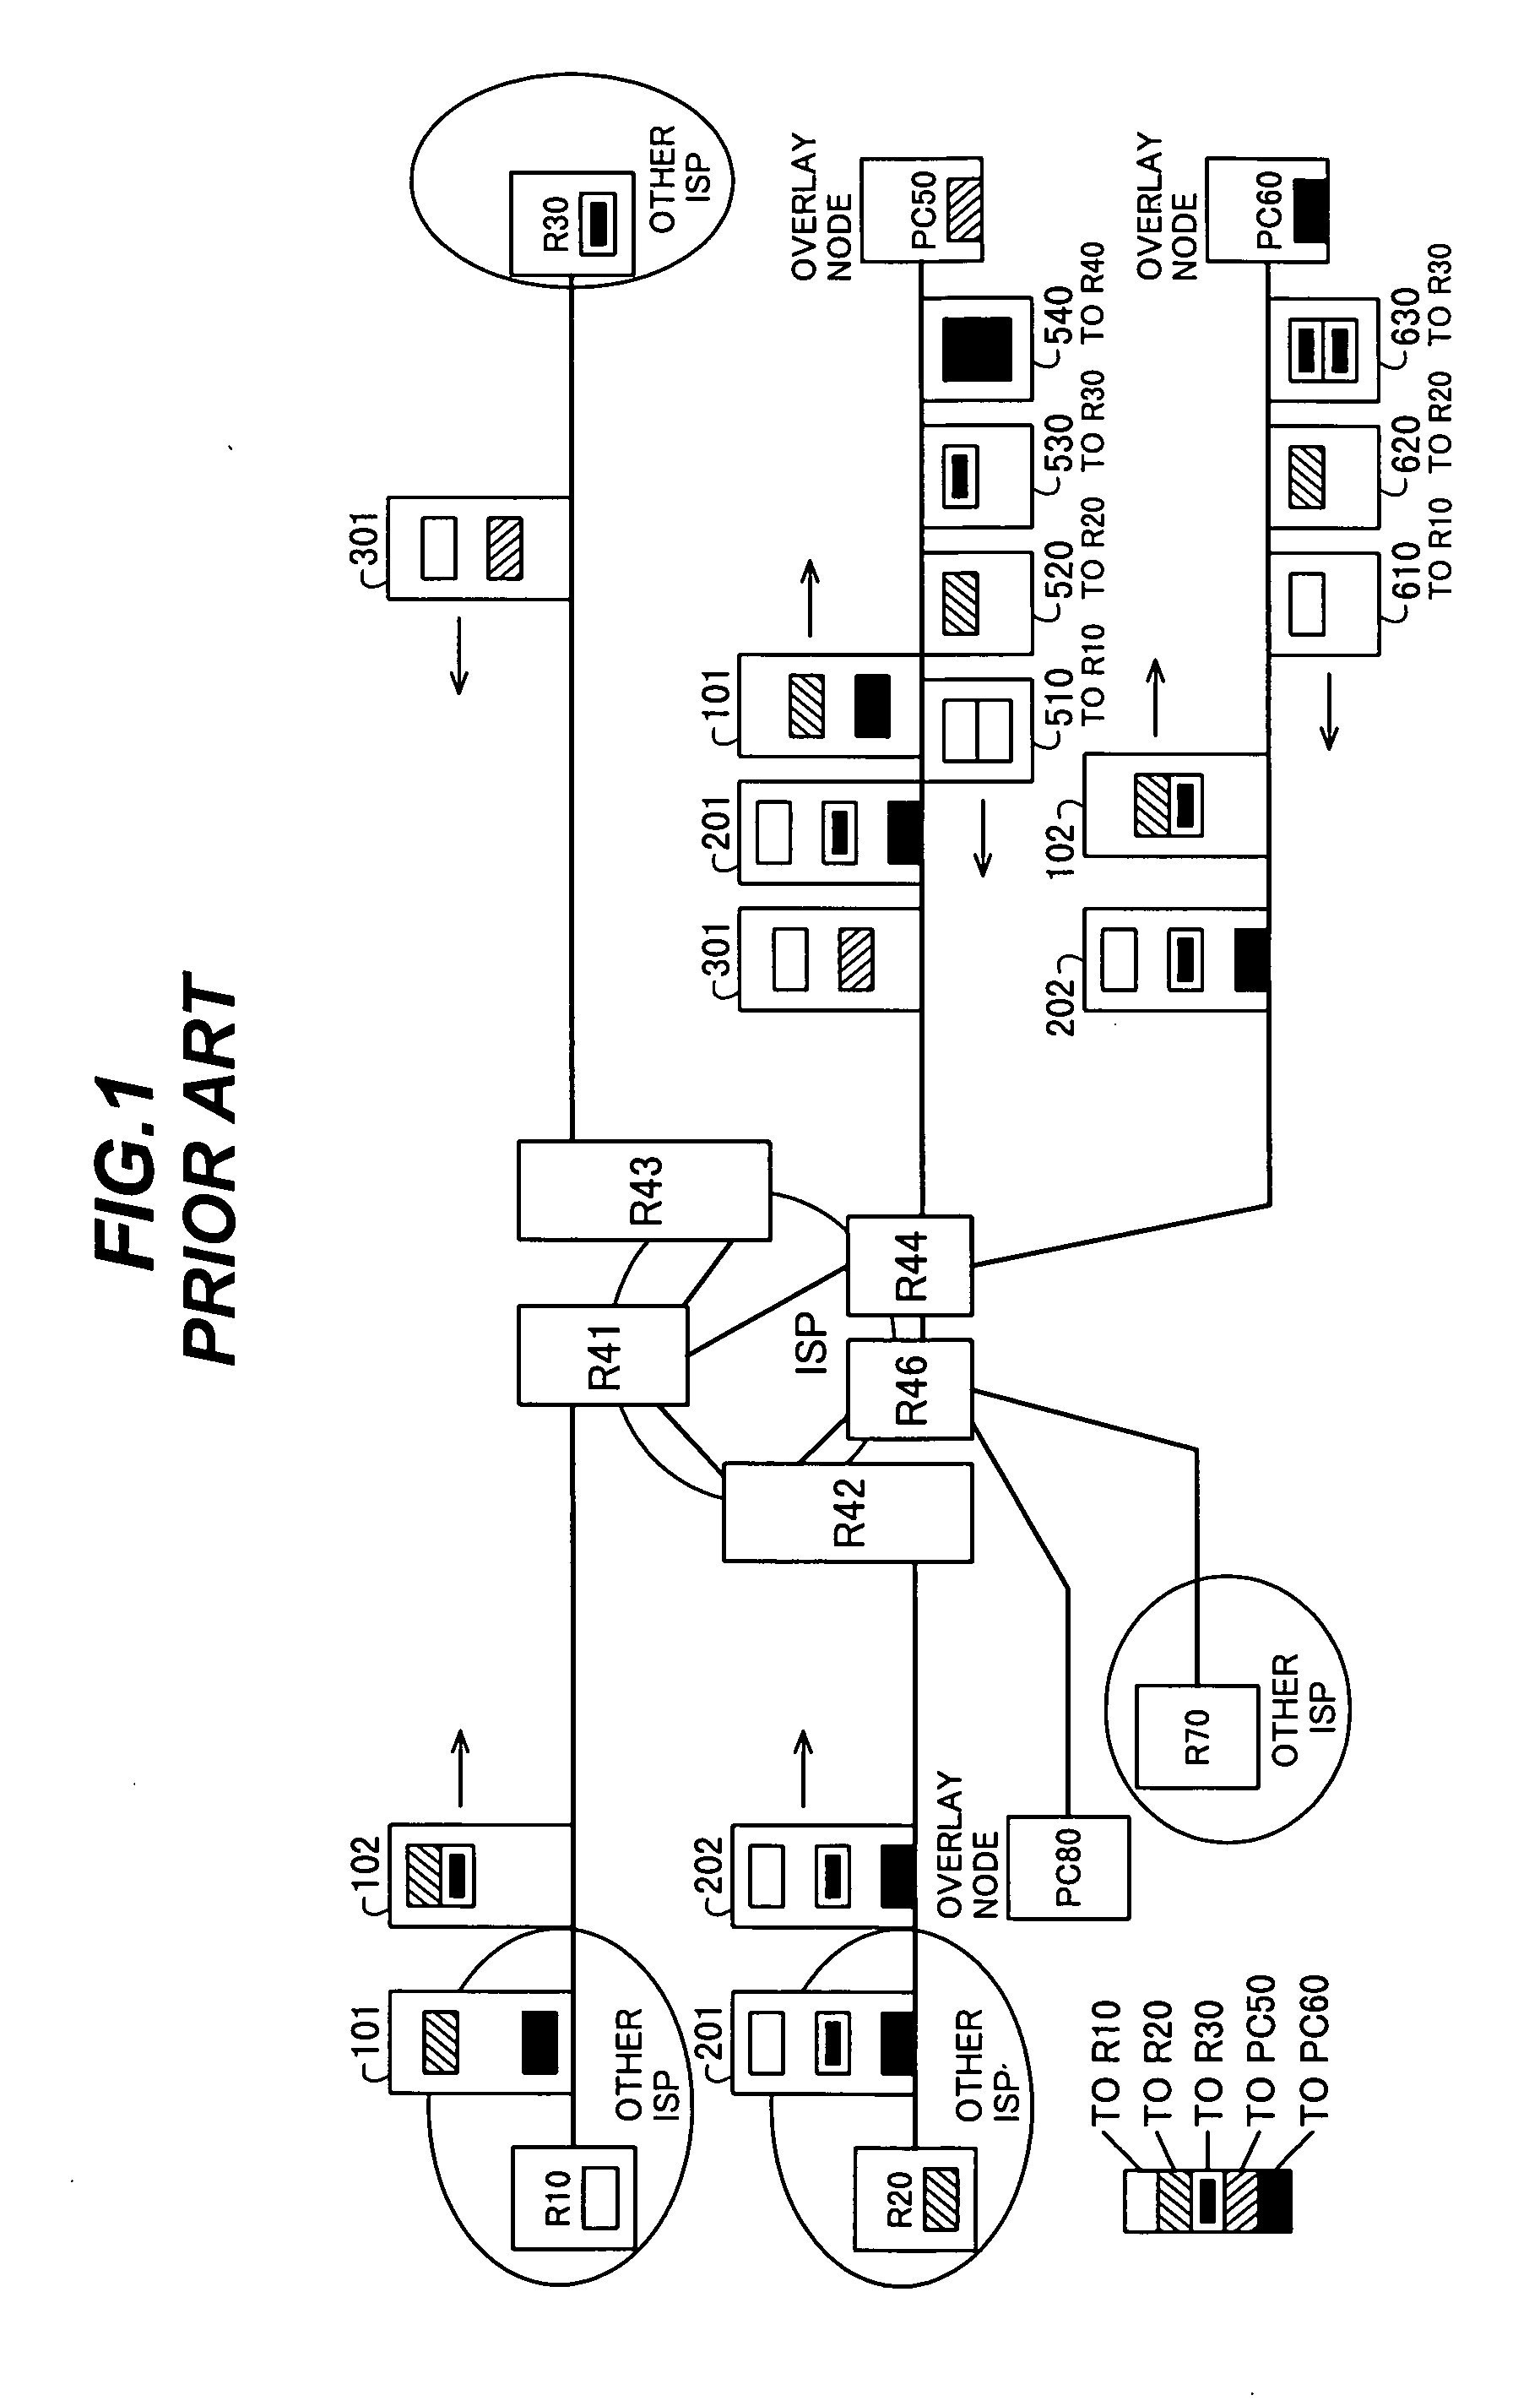 Overlay network traffic detection, monitoring, and control